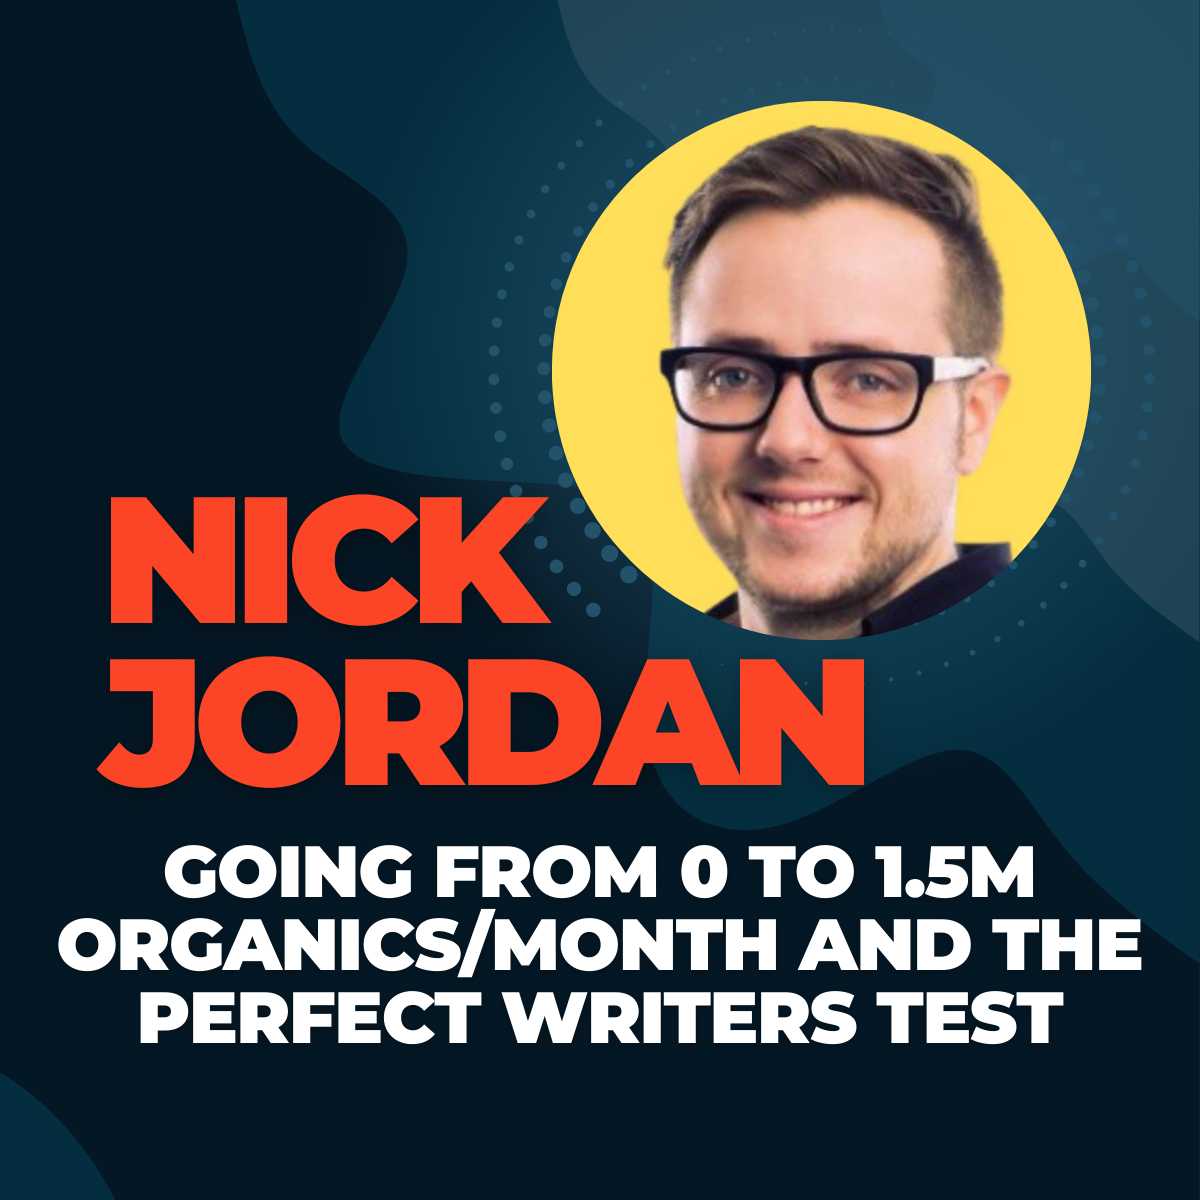 Nick Jordan going from 0 to 1.5m organics/month and the perfect writers test